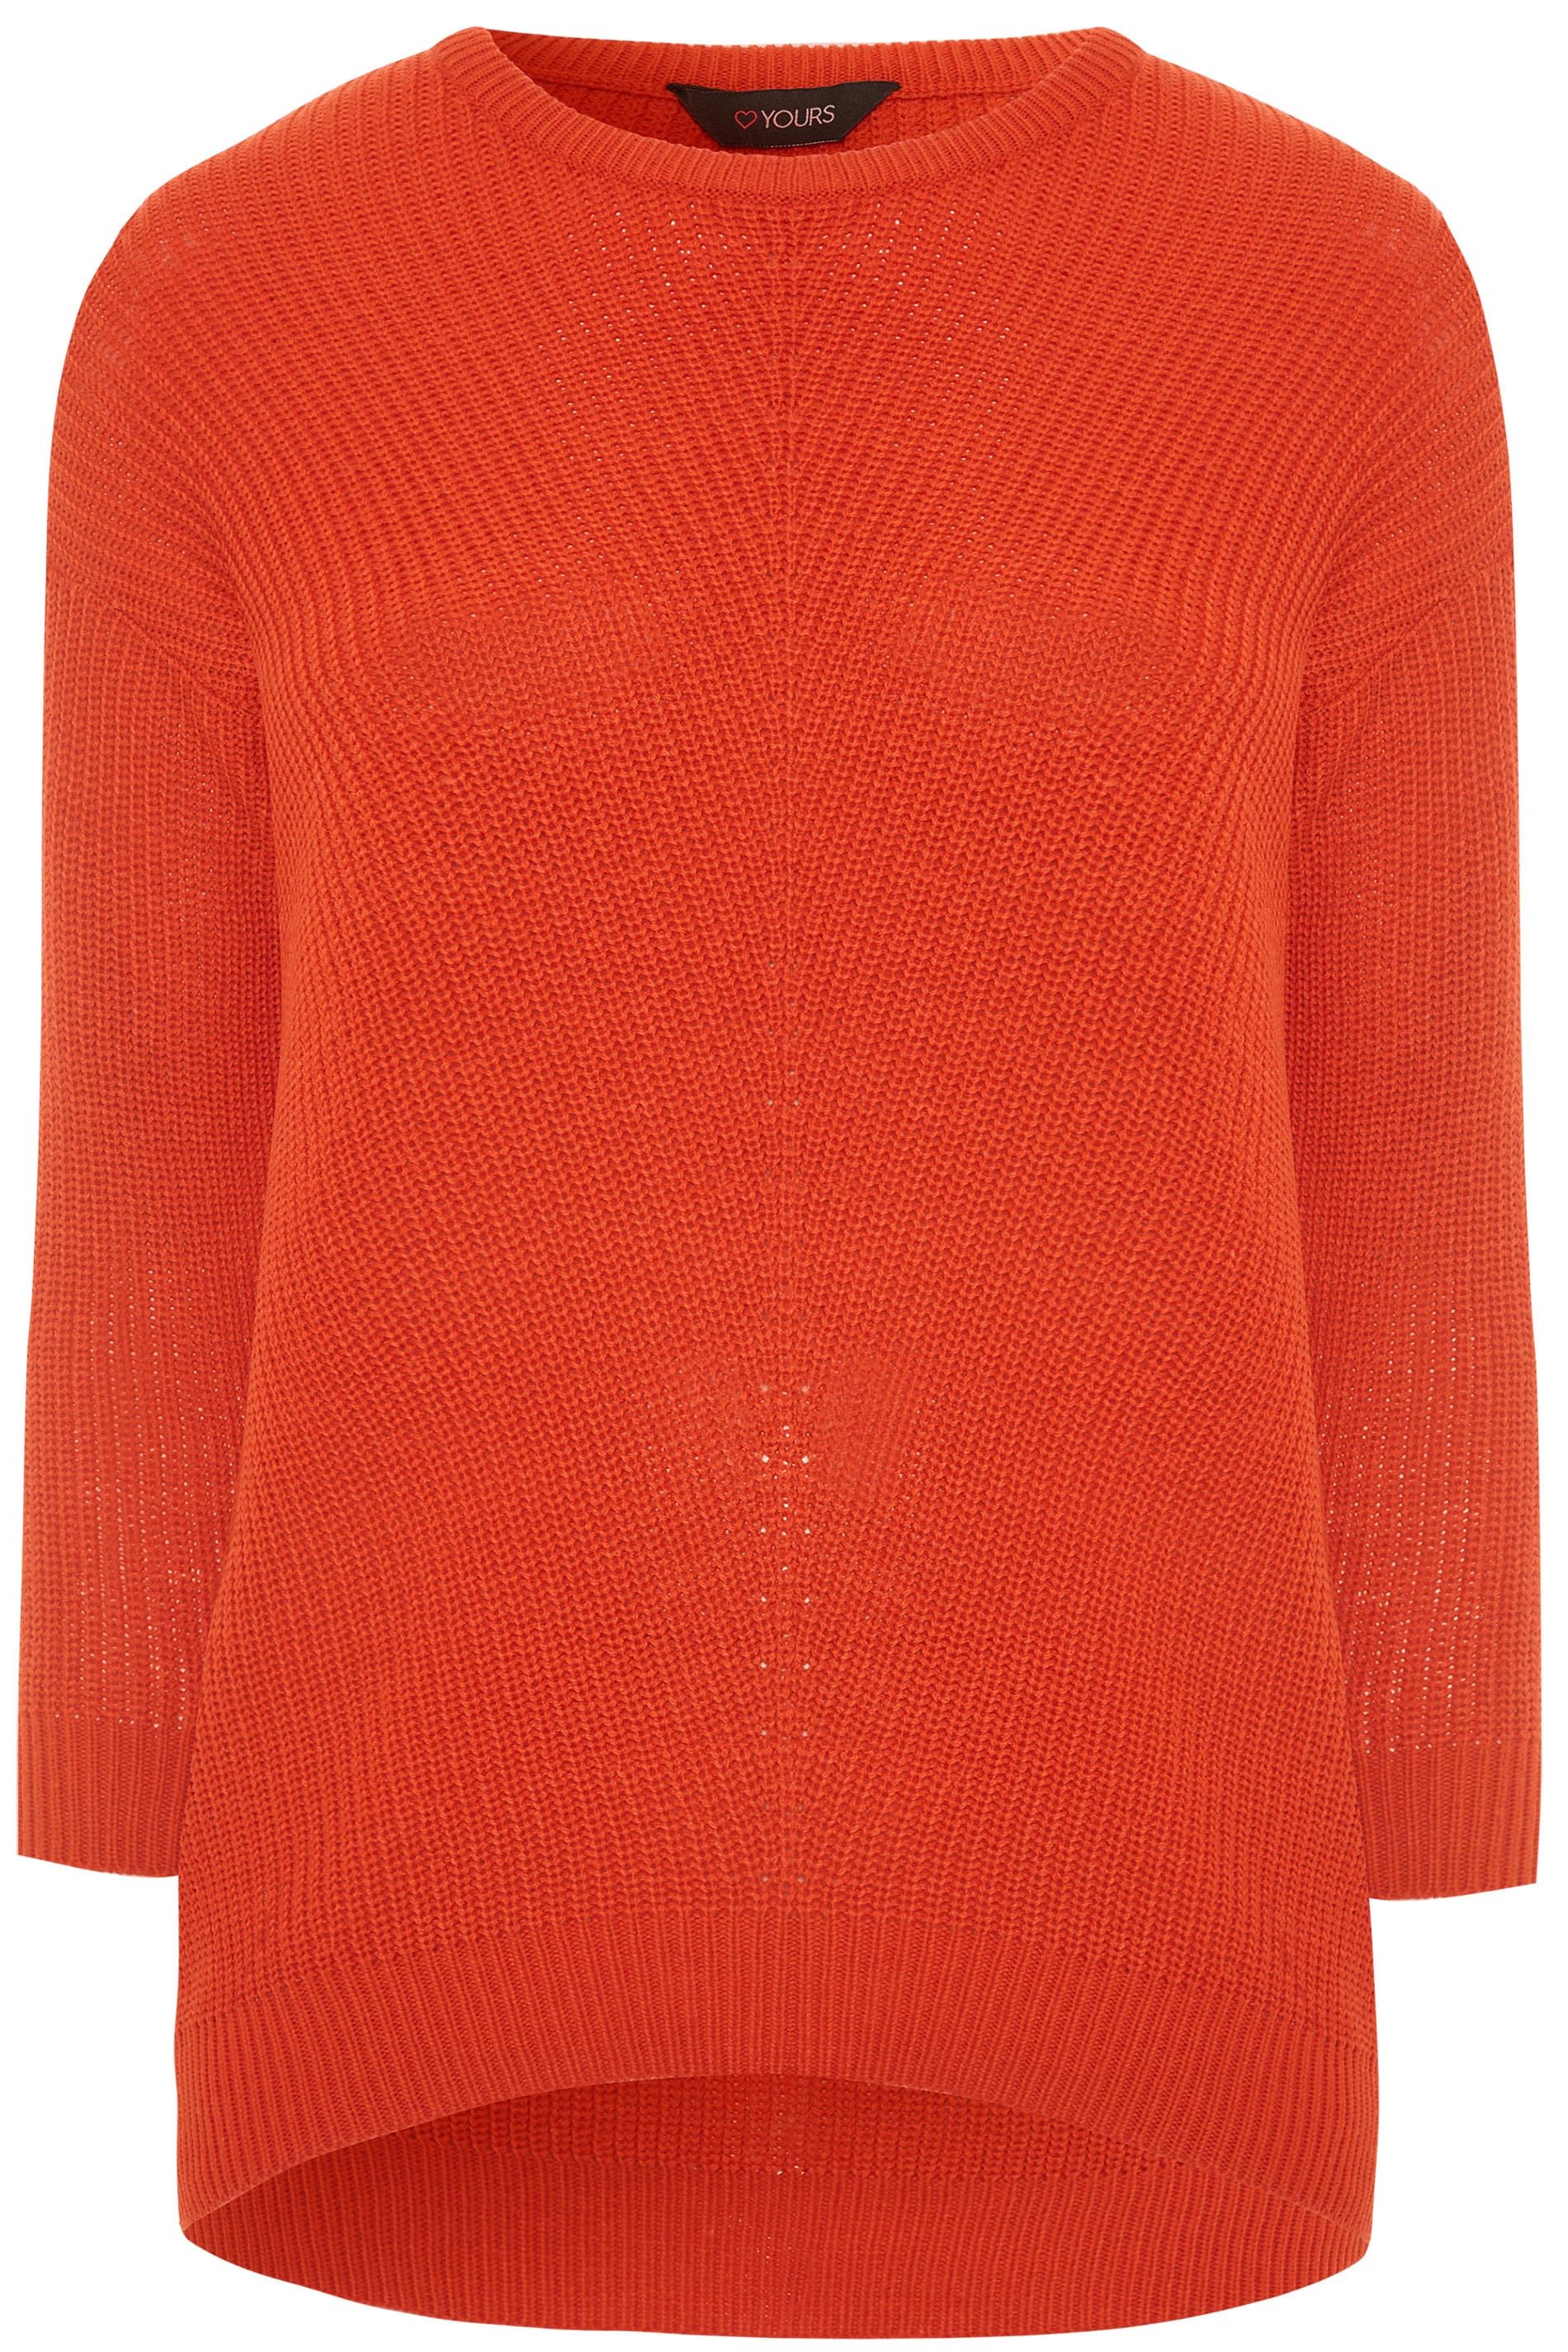 Orange Chunky Knitted Jumper | Yours Clothing